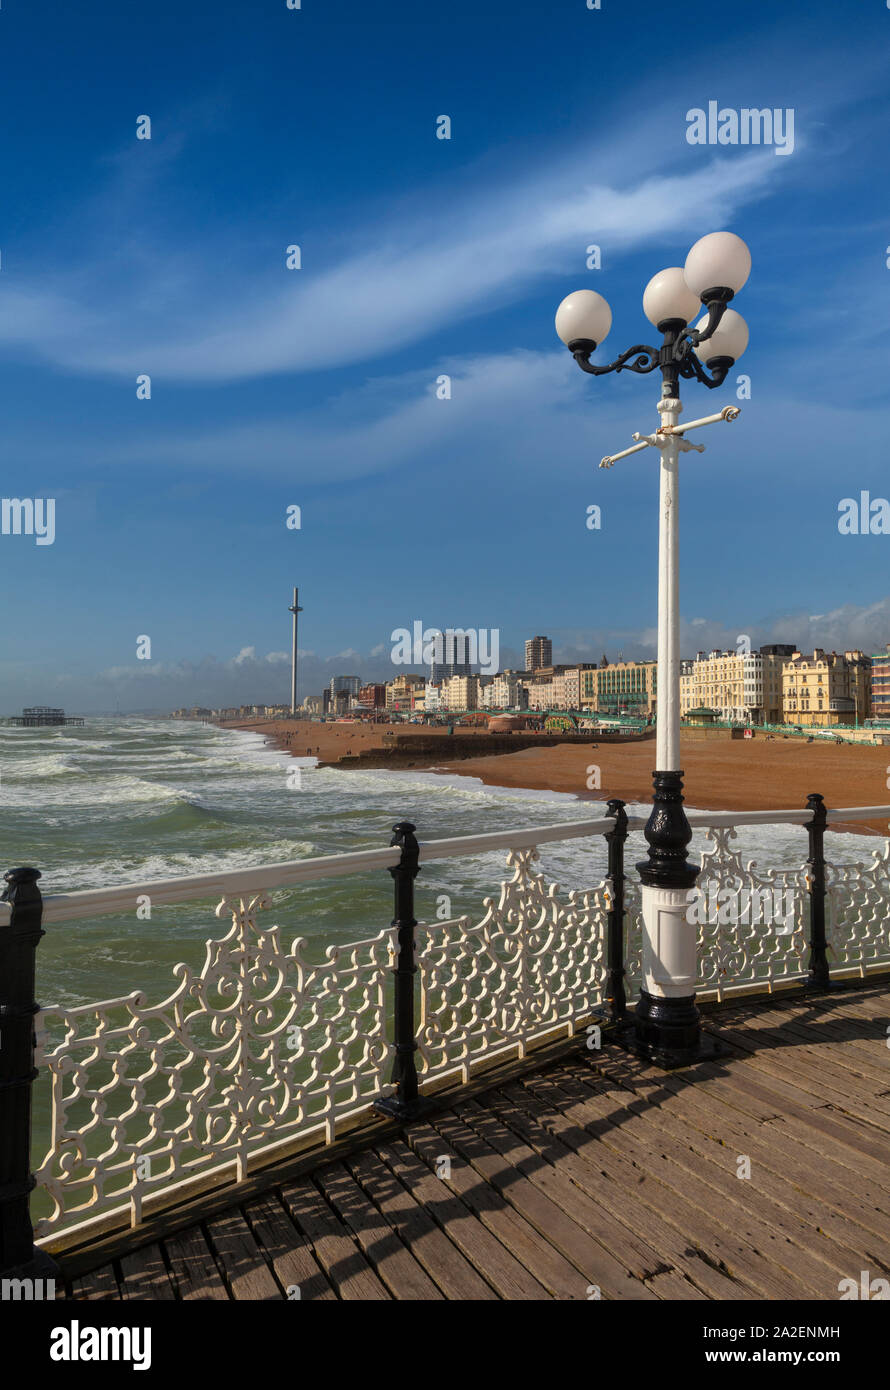 Views of the beach from Brighton Palace Pier, commonly known as Brighton Pier or the Palace Pier in Brighton, Sussex, England. Opened in 1899, it was Stock Photo